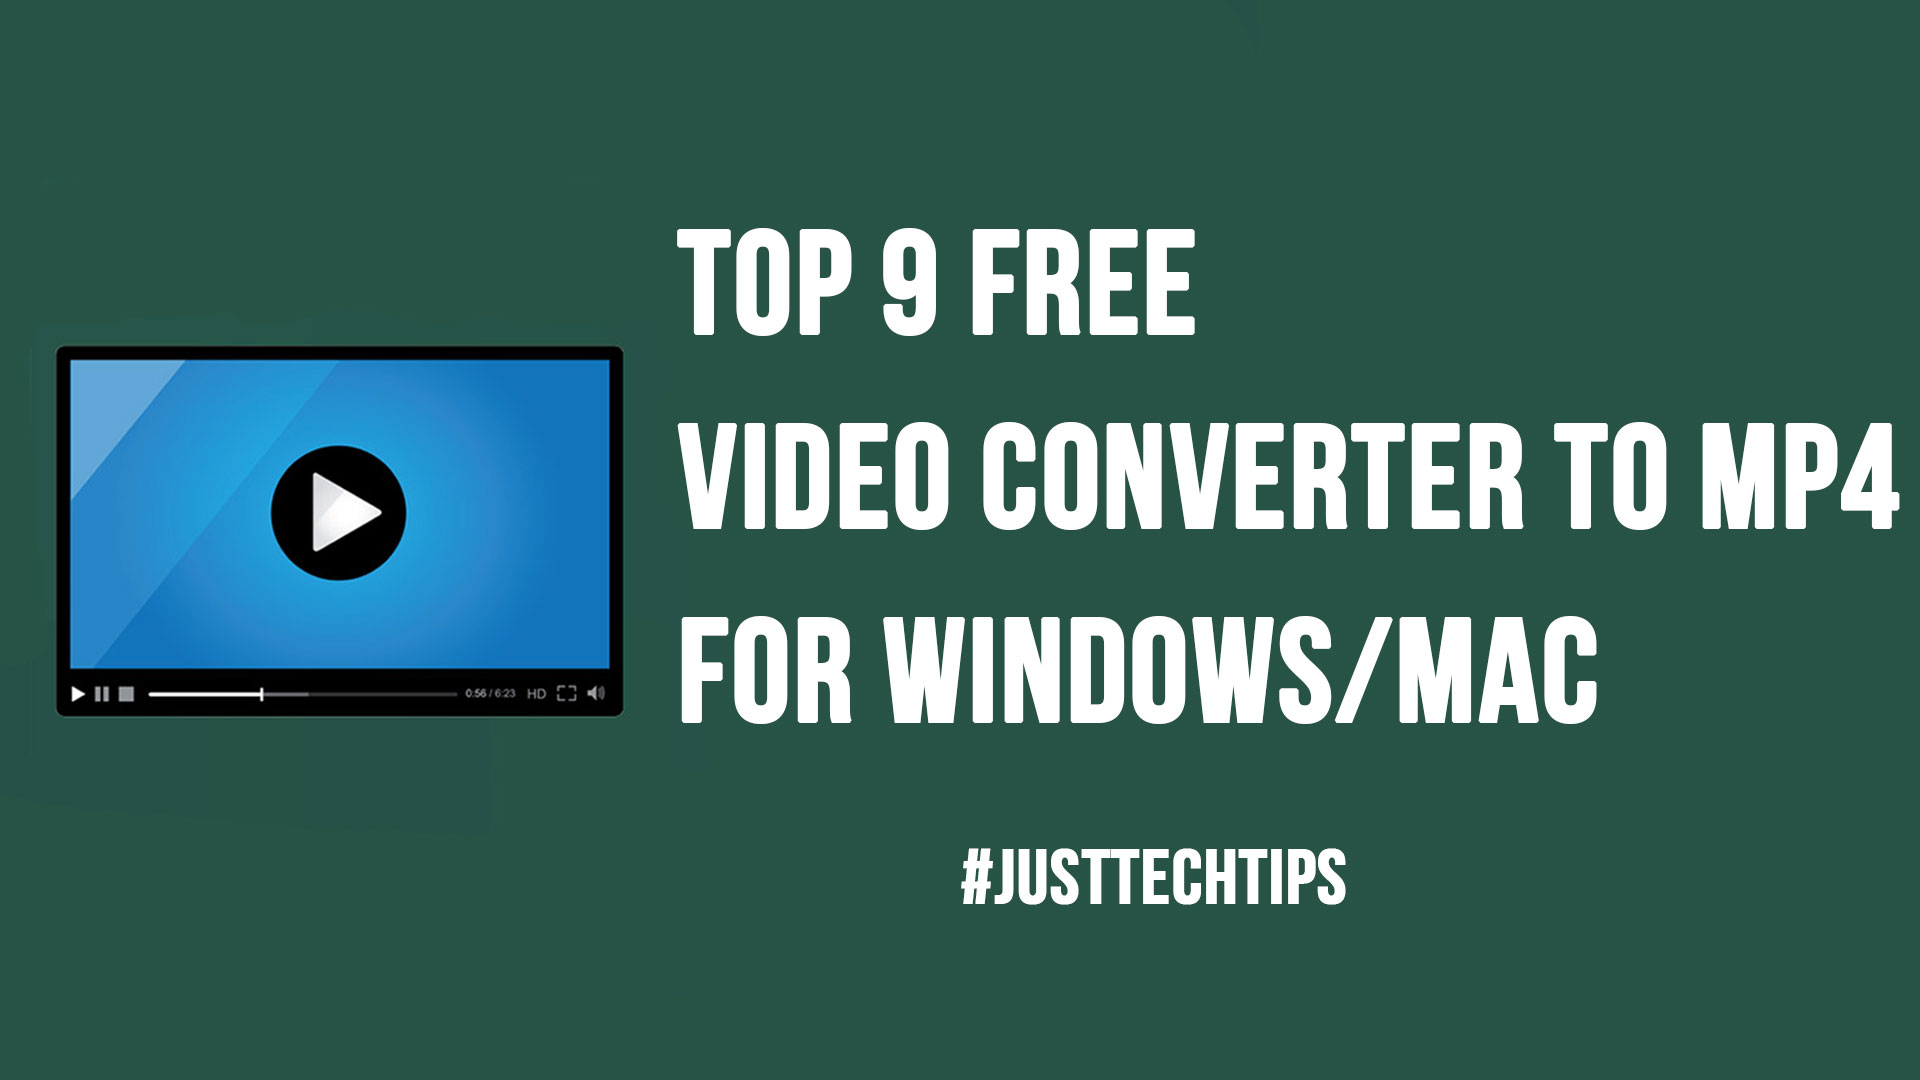 Top 9 Free Video Converter to Mp4